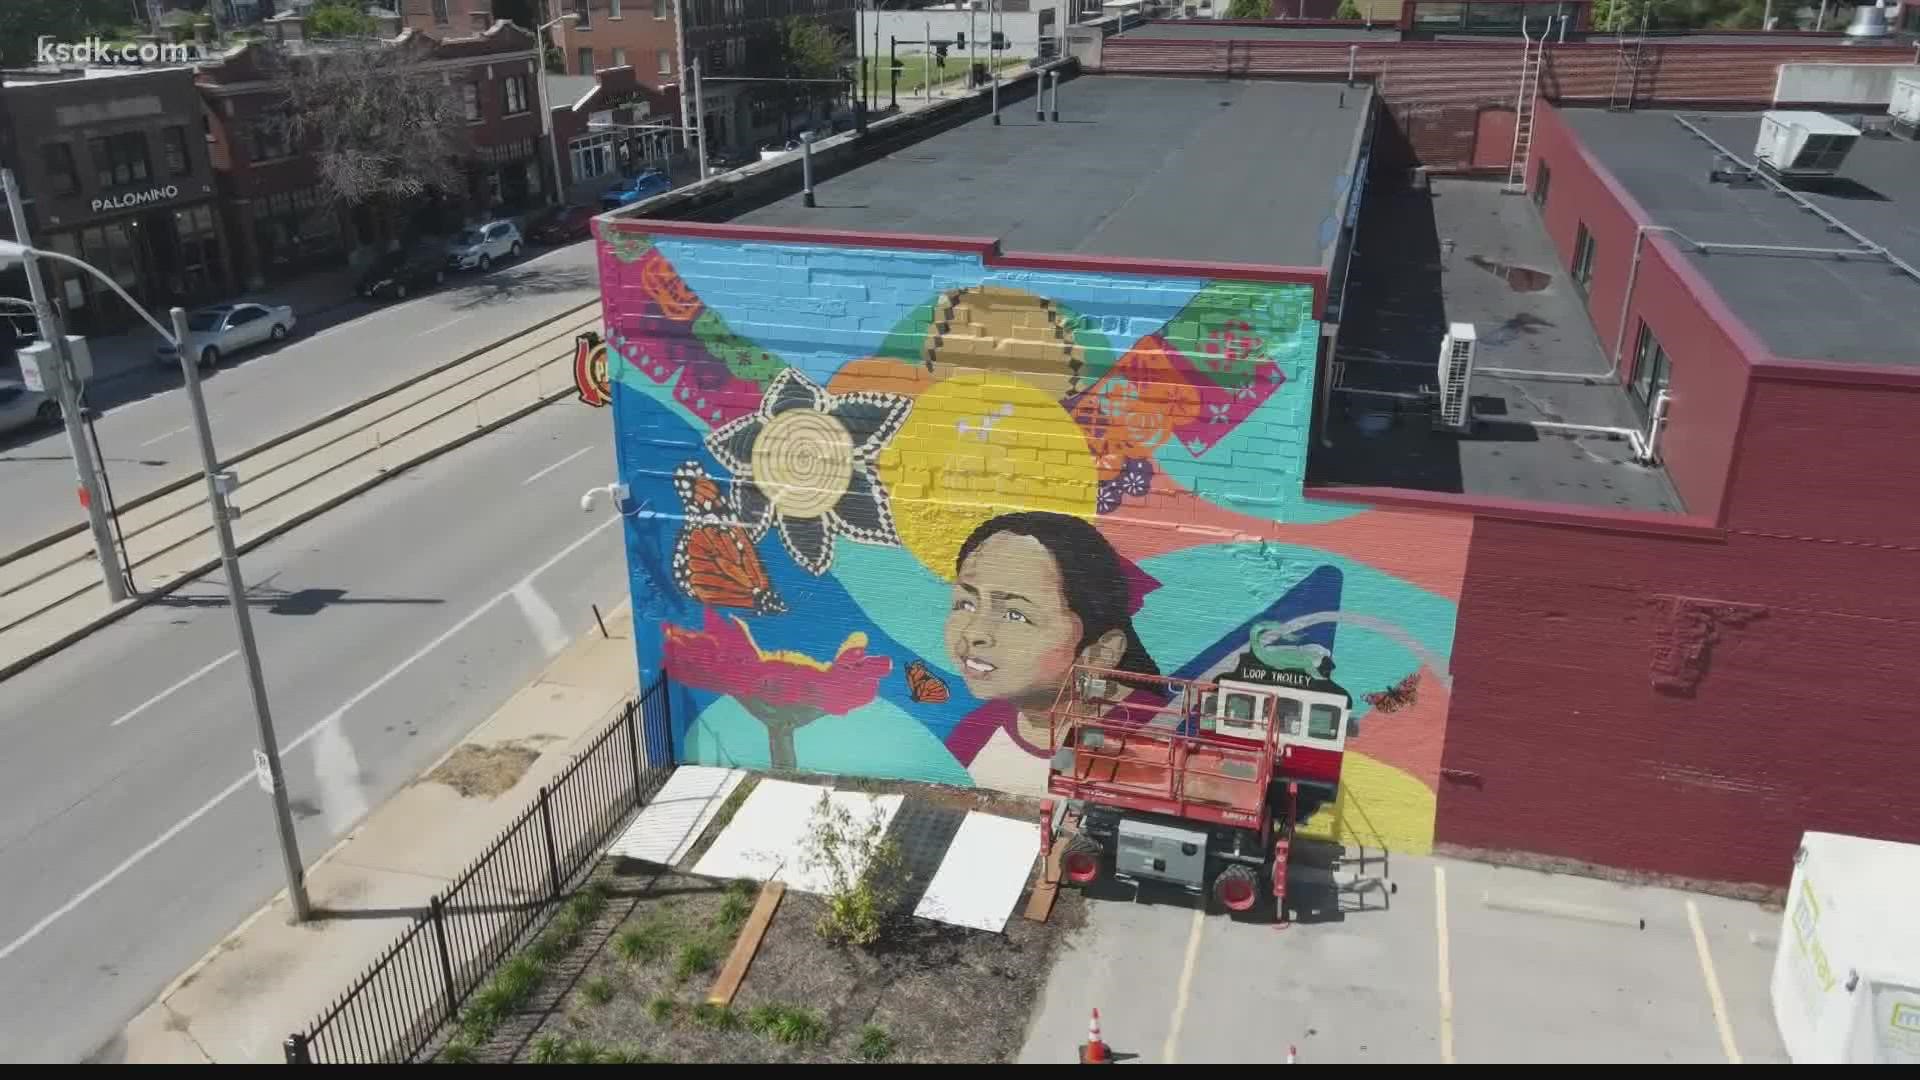 A group of artists is creating a mural on the Delmar Loop to represent their community.